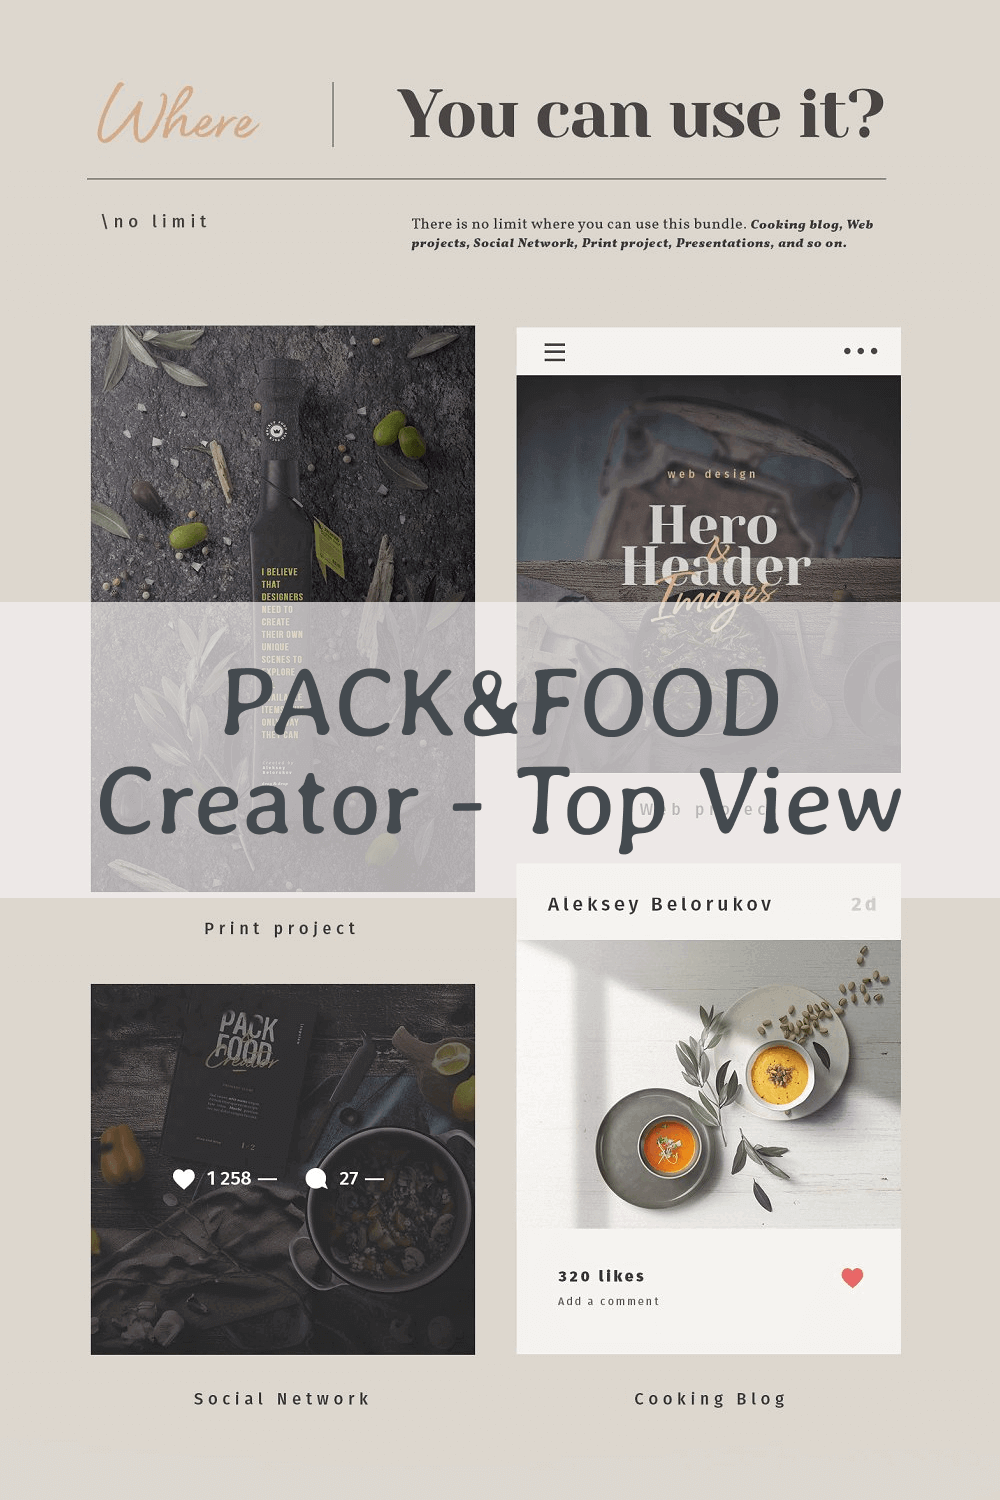 Where Use PACK&FOOD Creator - top view.